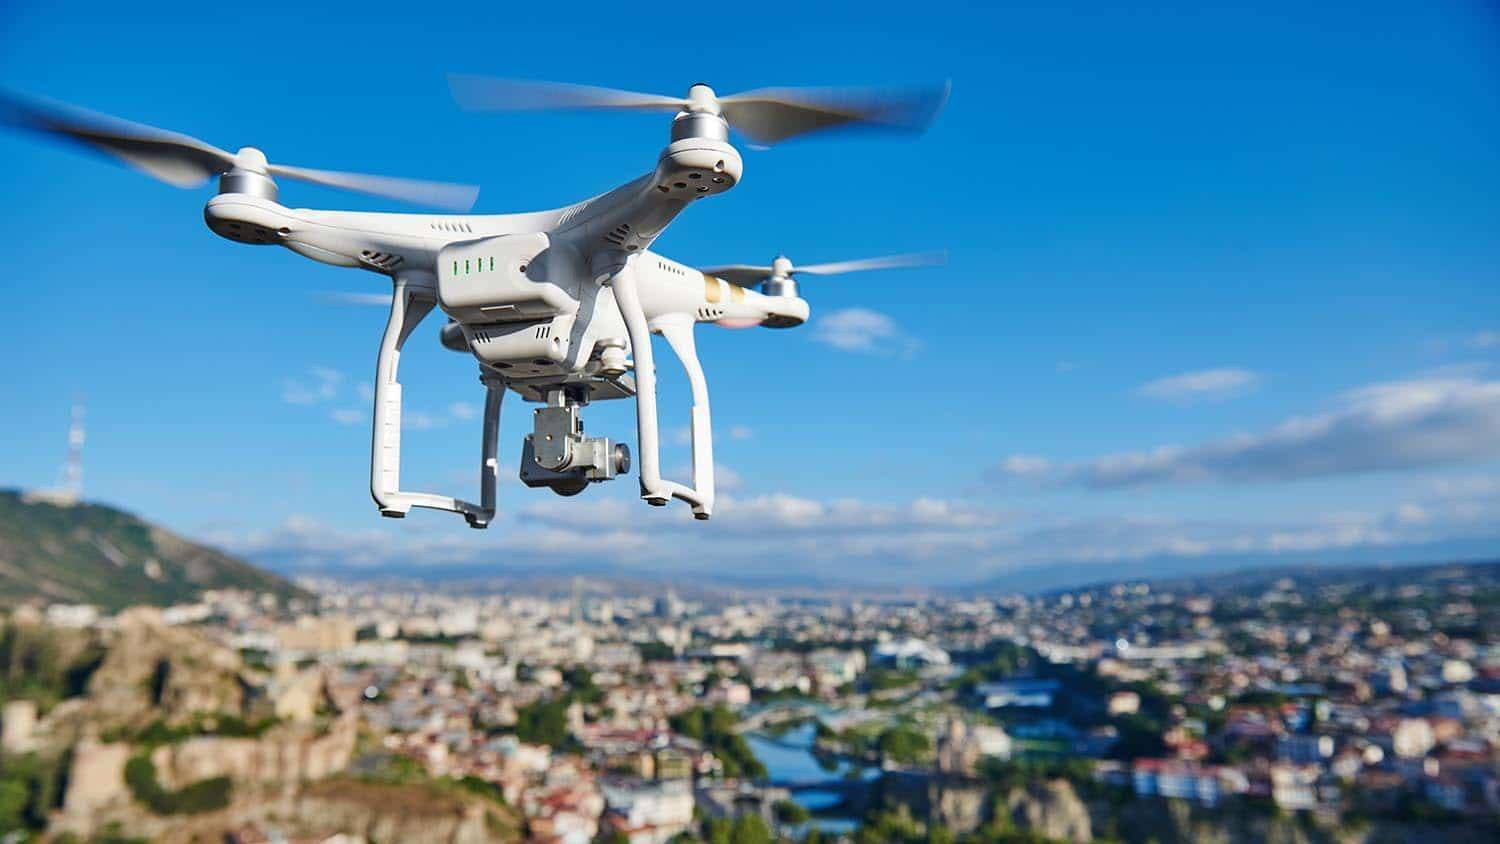 Balancing the rights of property owners and the needs of drone operators